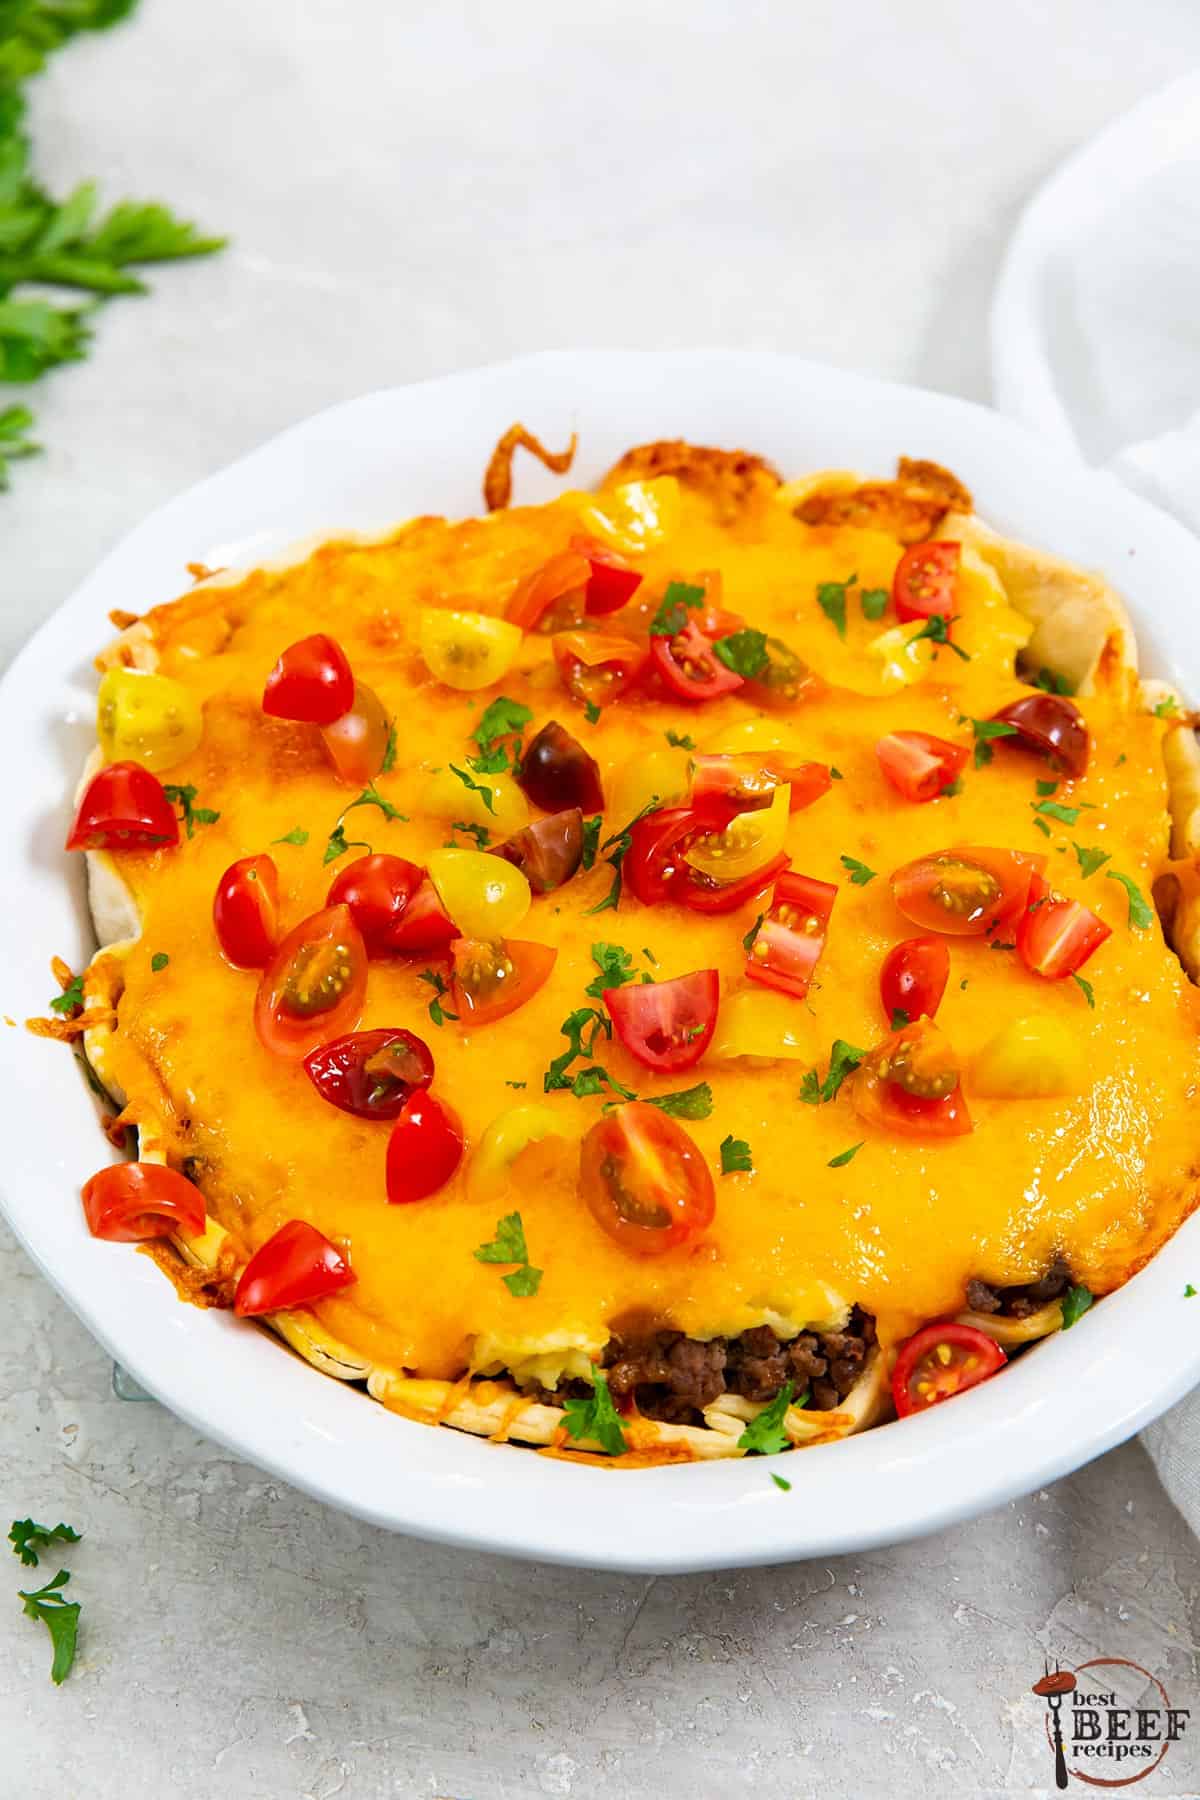 baked cheeseburger pie in a dish with sliced tomatoes and parsley for garnish